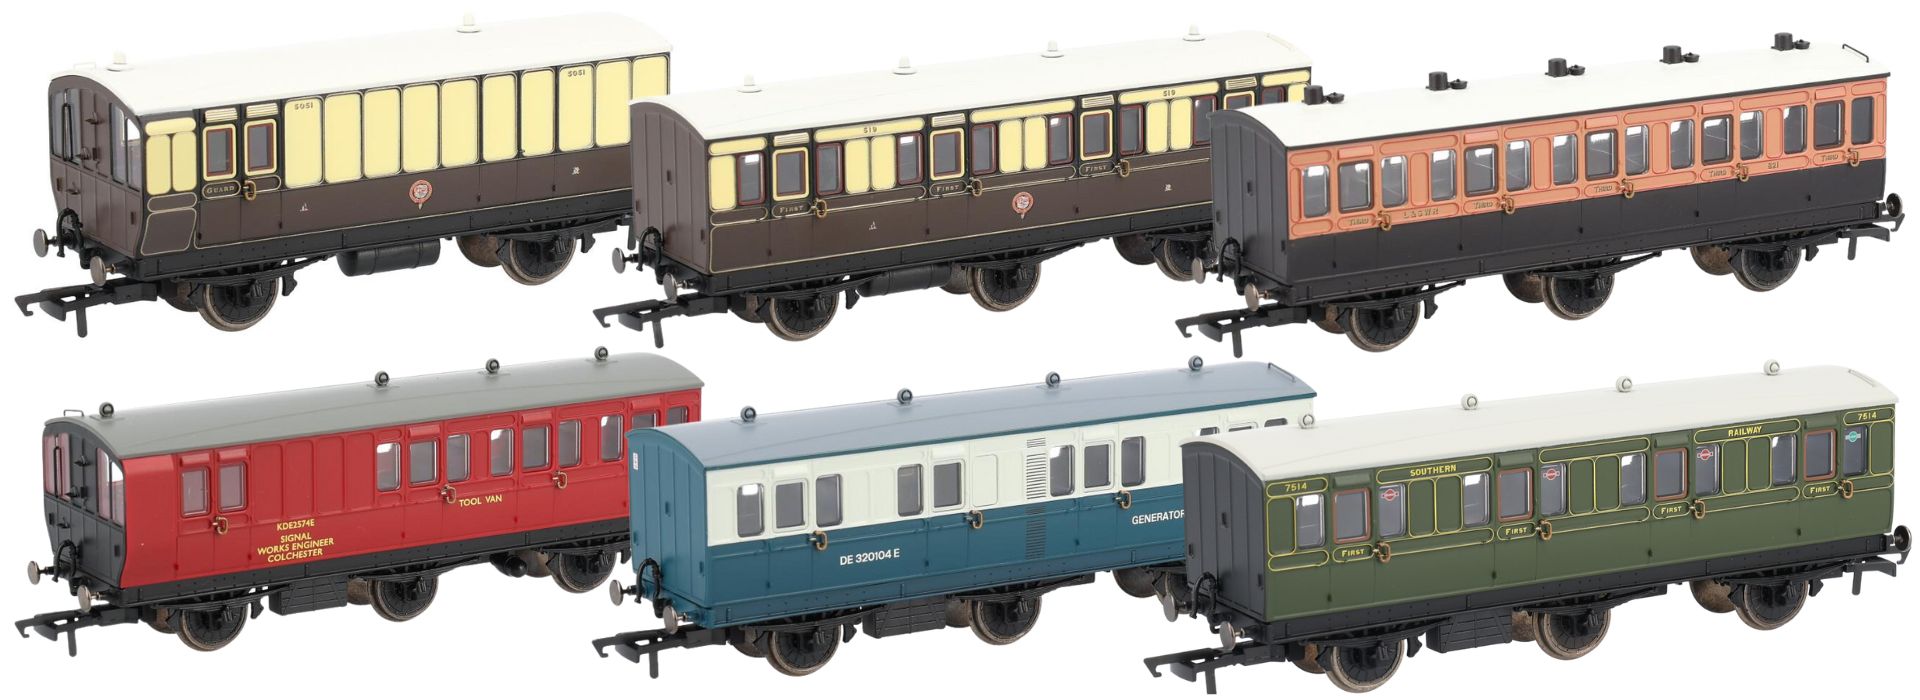 Hornby OO Gauge (1:76 Scale) 4 and 6 wheel Hornby generic coaches